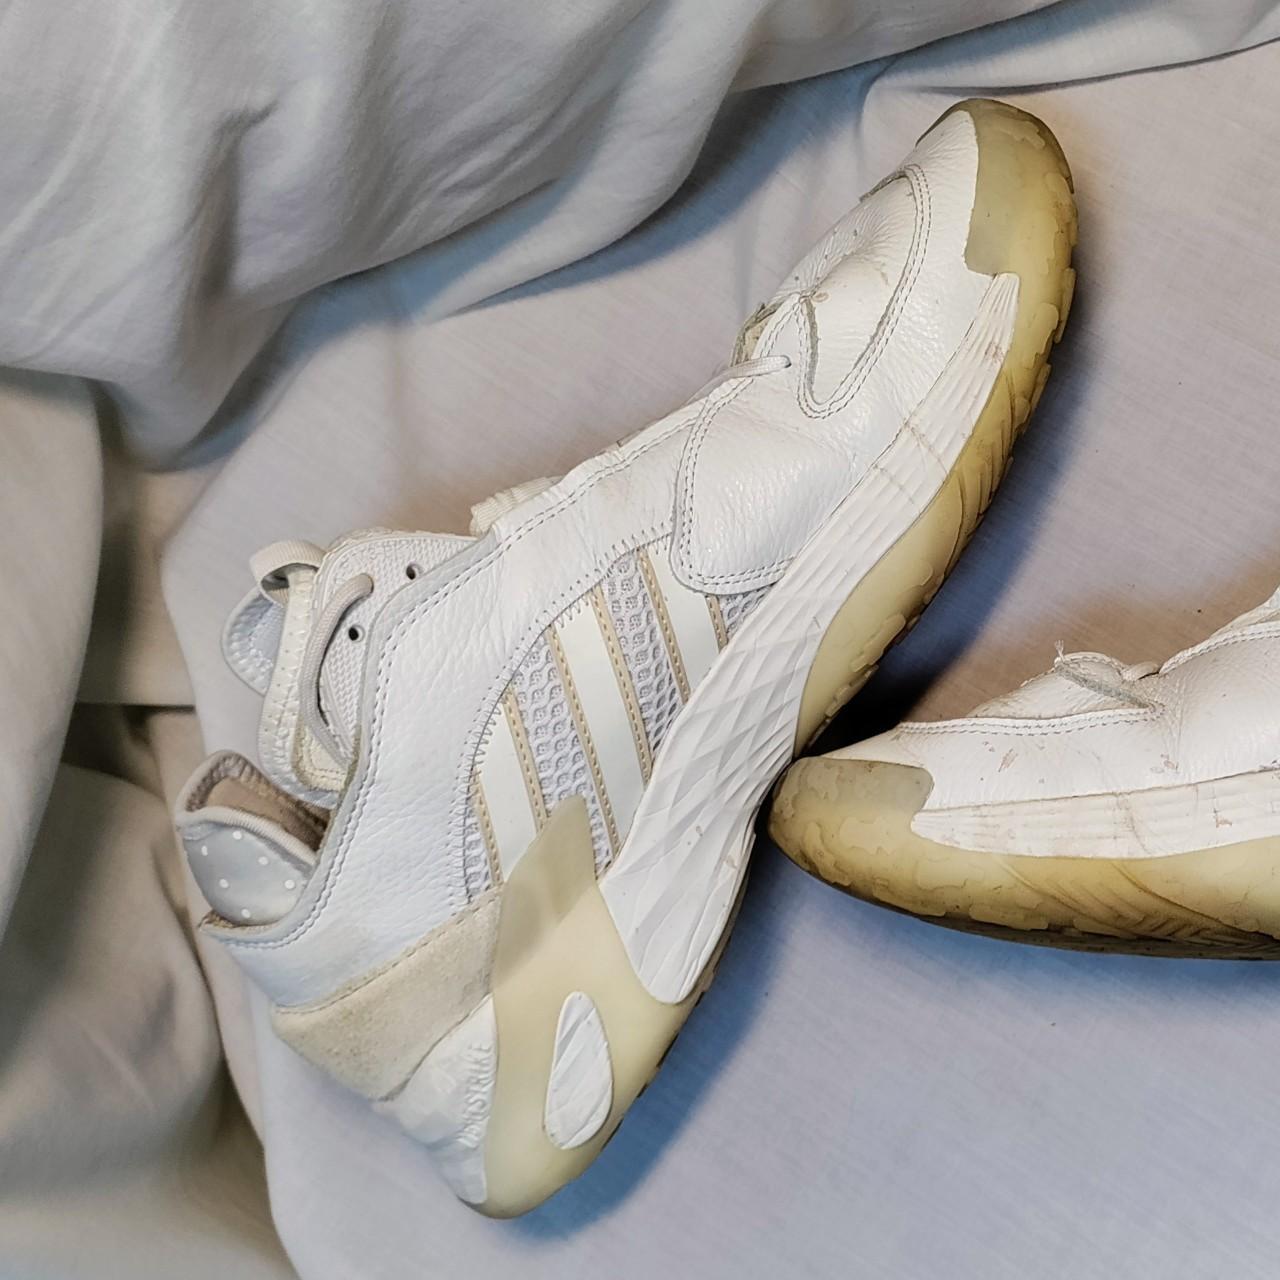 Adidas Streetball trainers. White leather, suede and - Depop